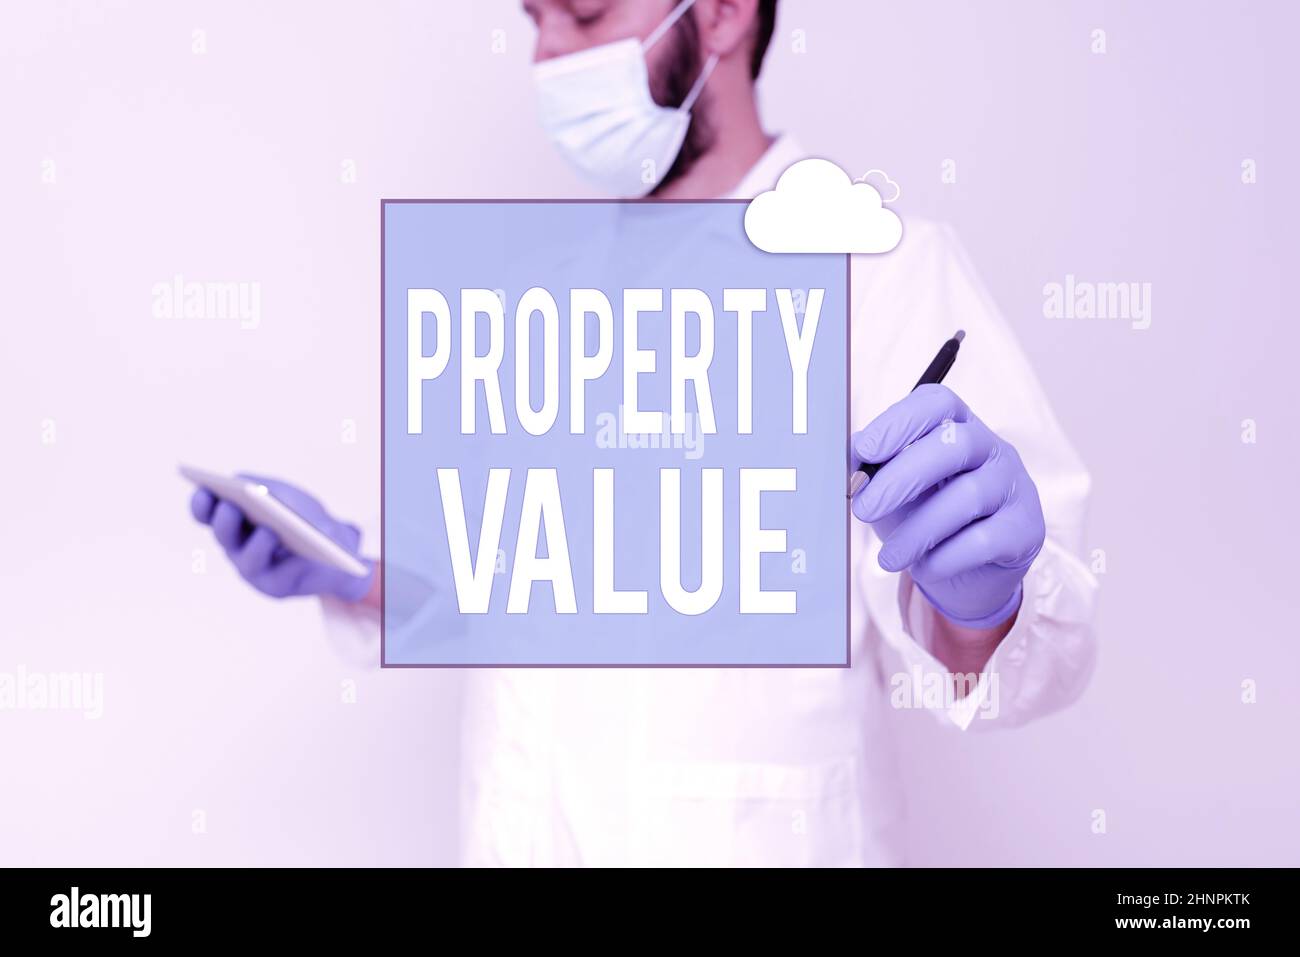 Text showing inspiration Property Value, Business idea Worth of a land Real estate appraisal Fair market price Scientist Demonstrating New Technology, Stock Photo